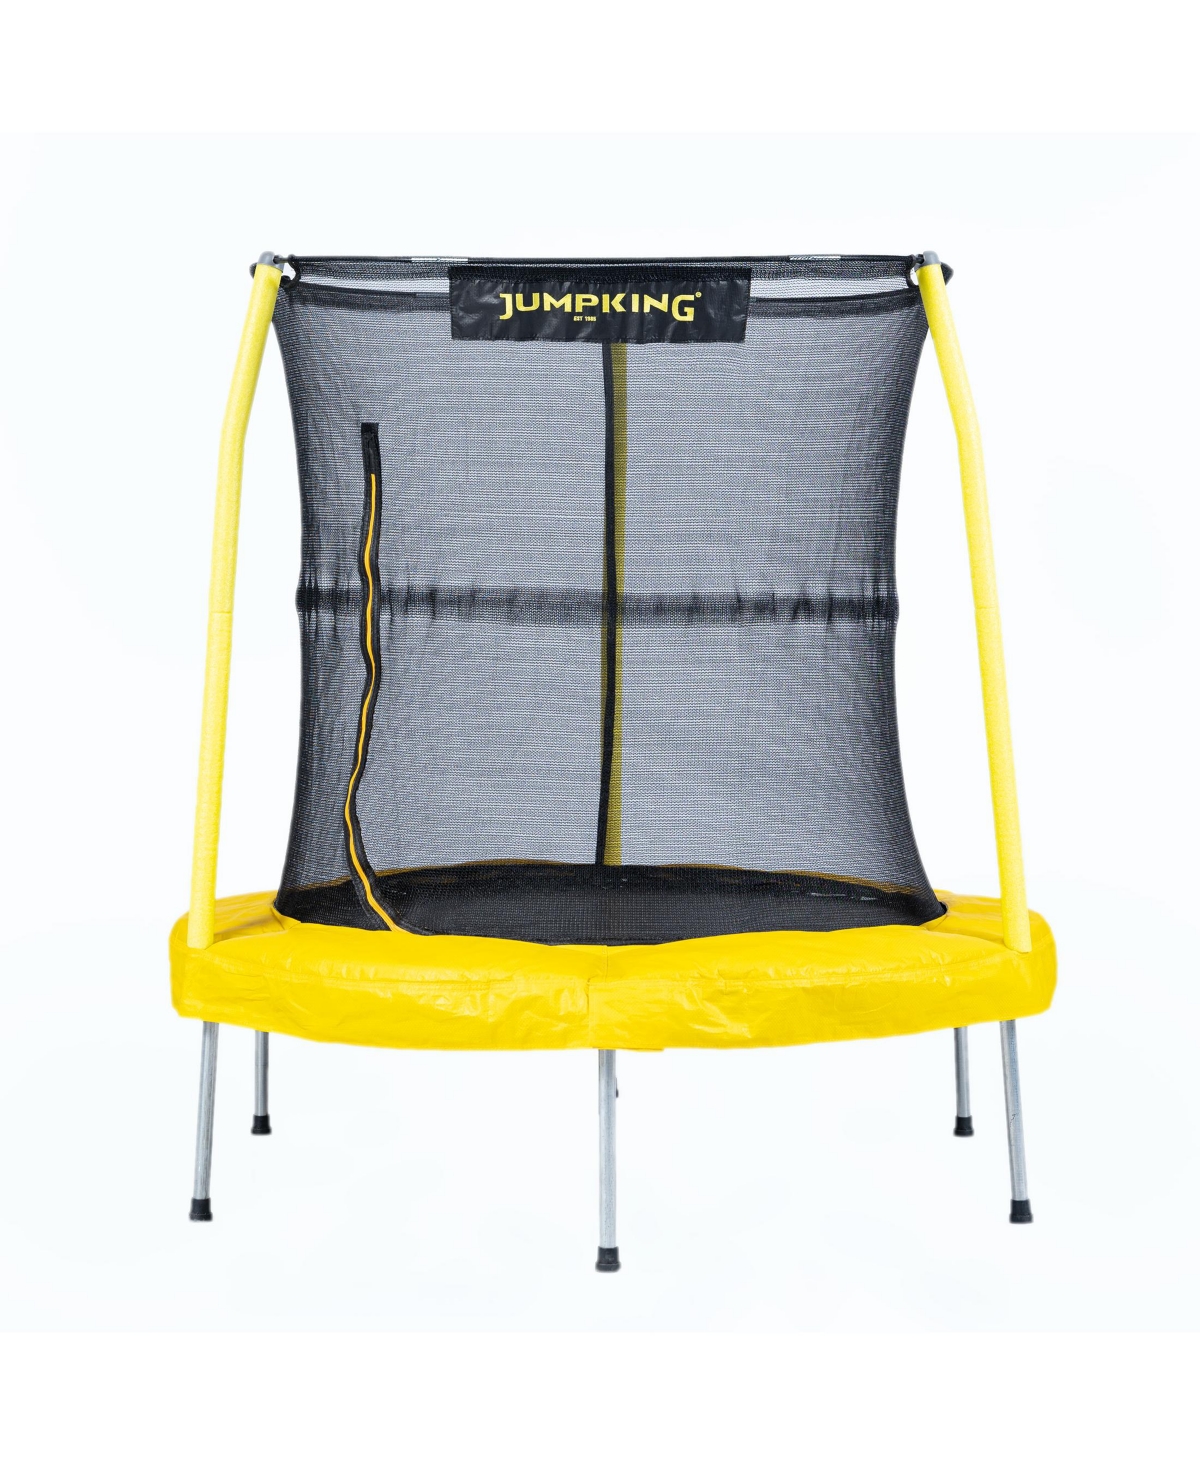 Jumpking 55" Trampoline With Enclosure In Yellow